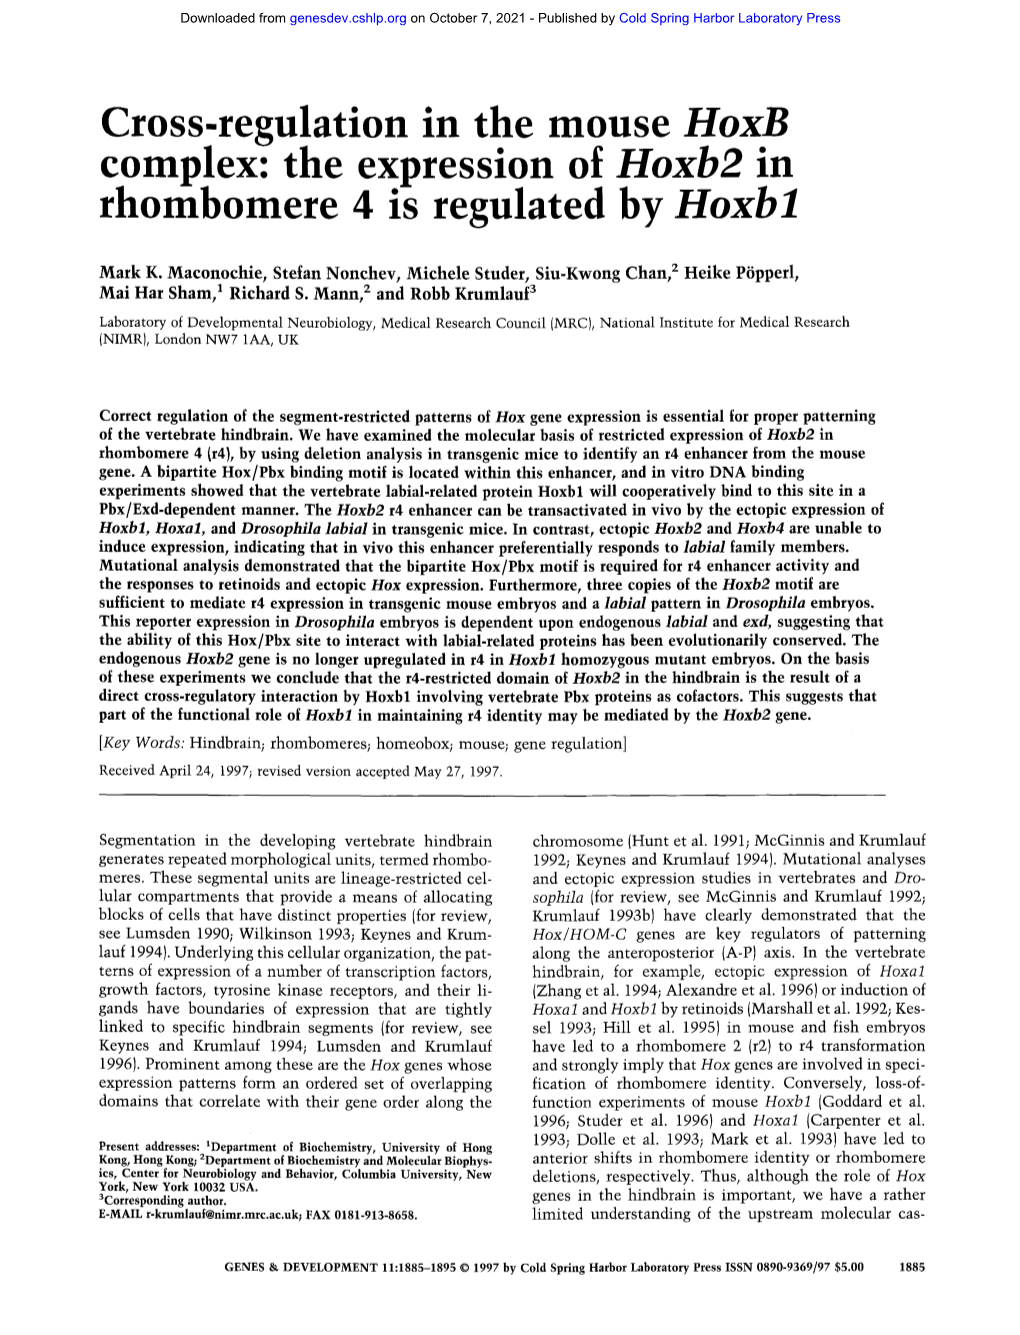 The Expression of Hoxb2 in Rhombomere 4 Is Regulated by Hoxbl